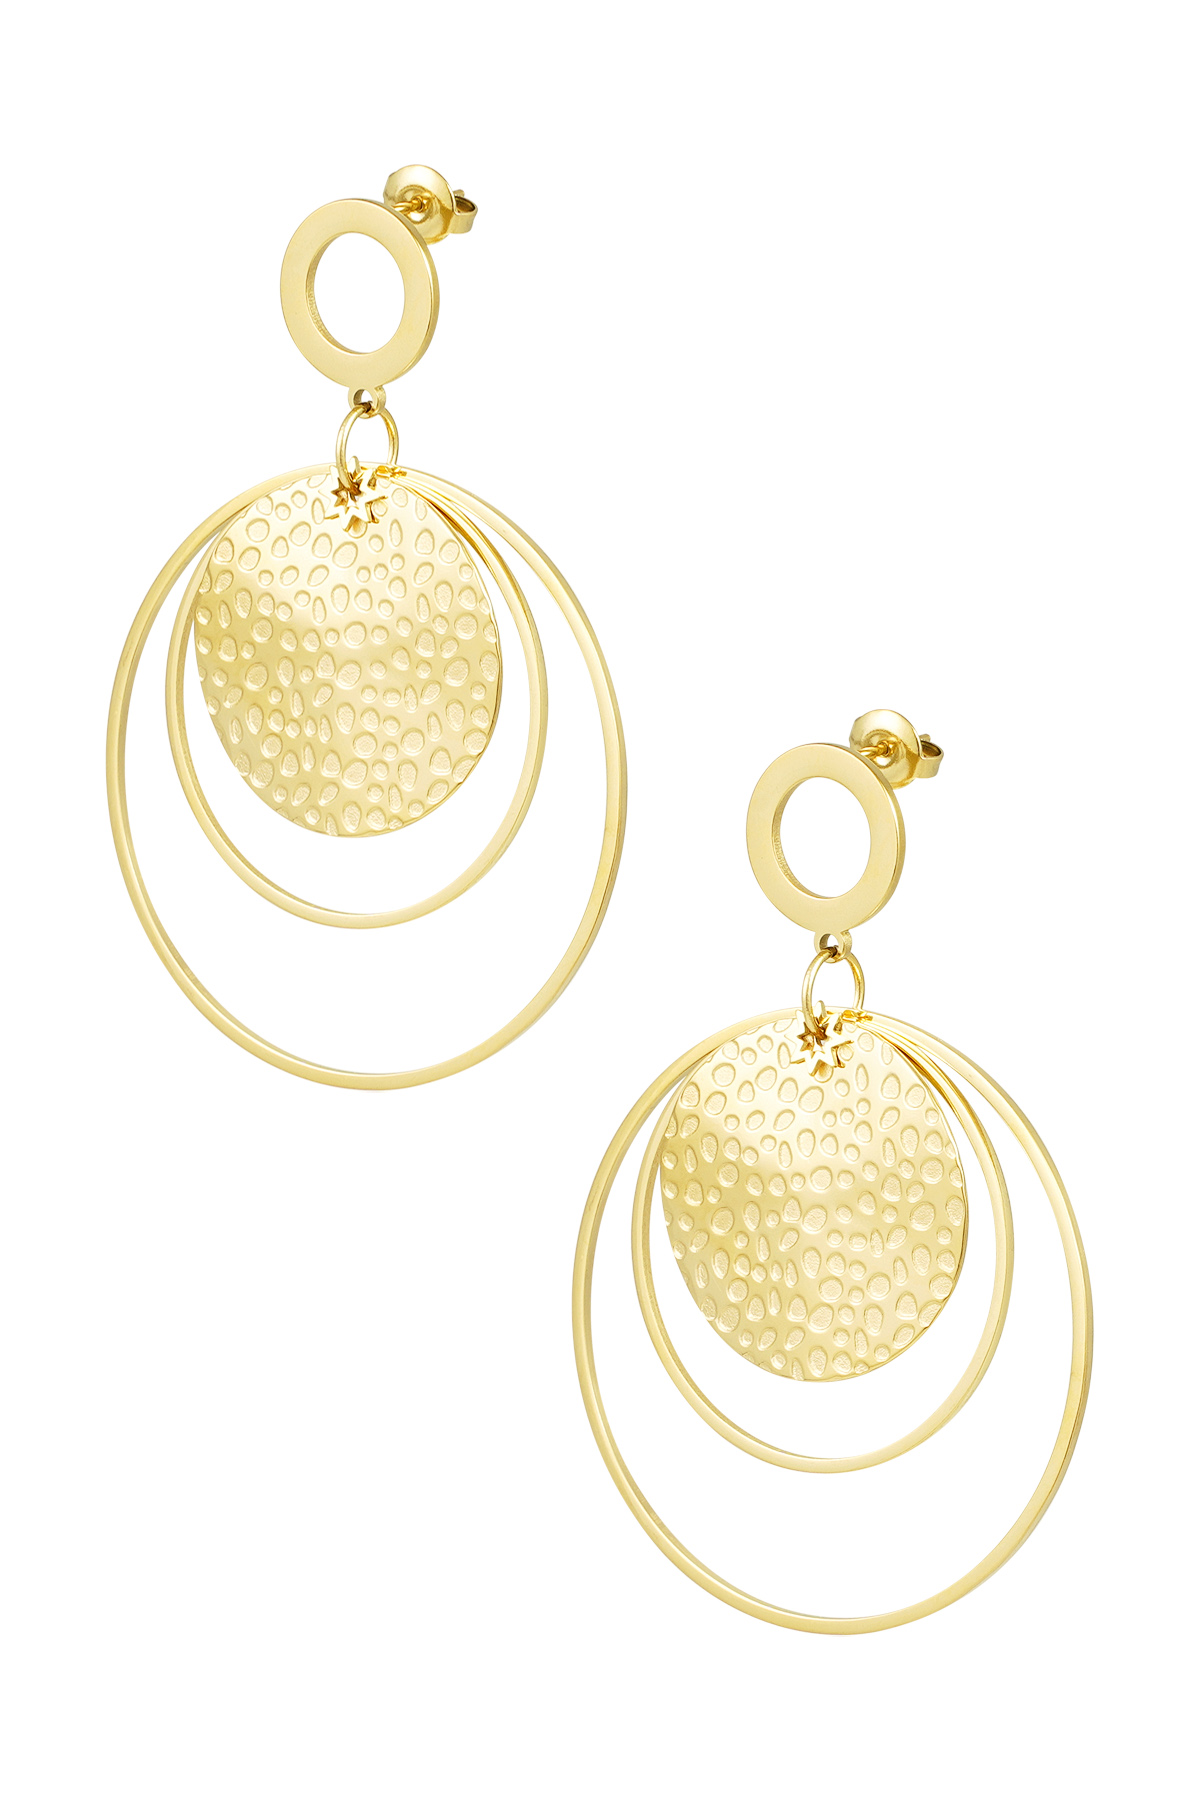 Earrings different rings - gold h5 